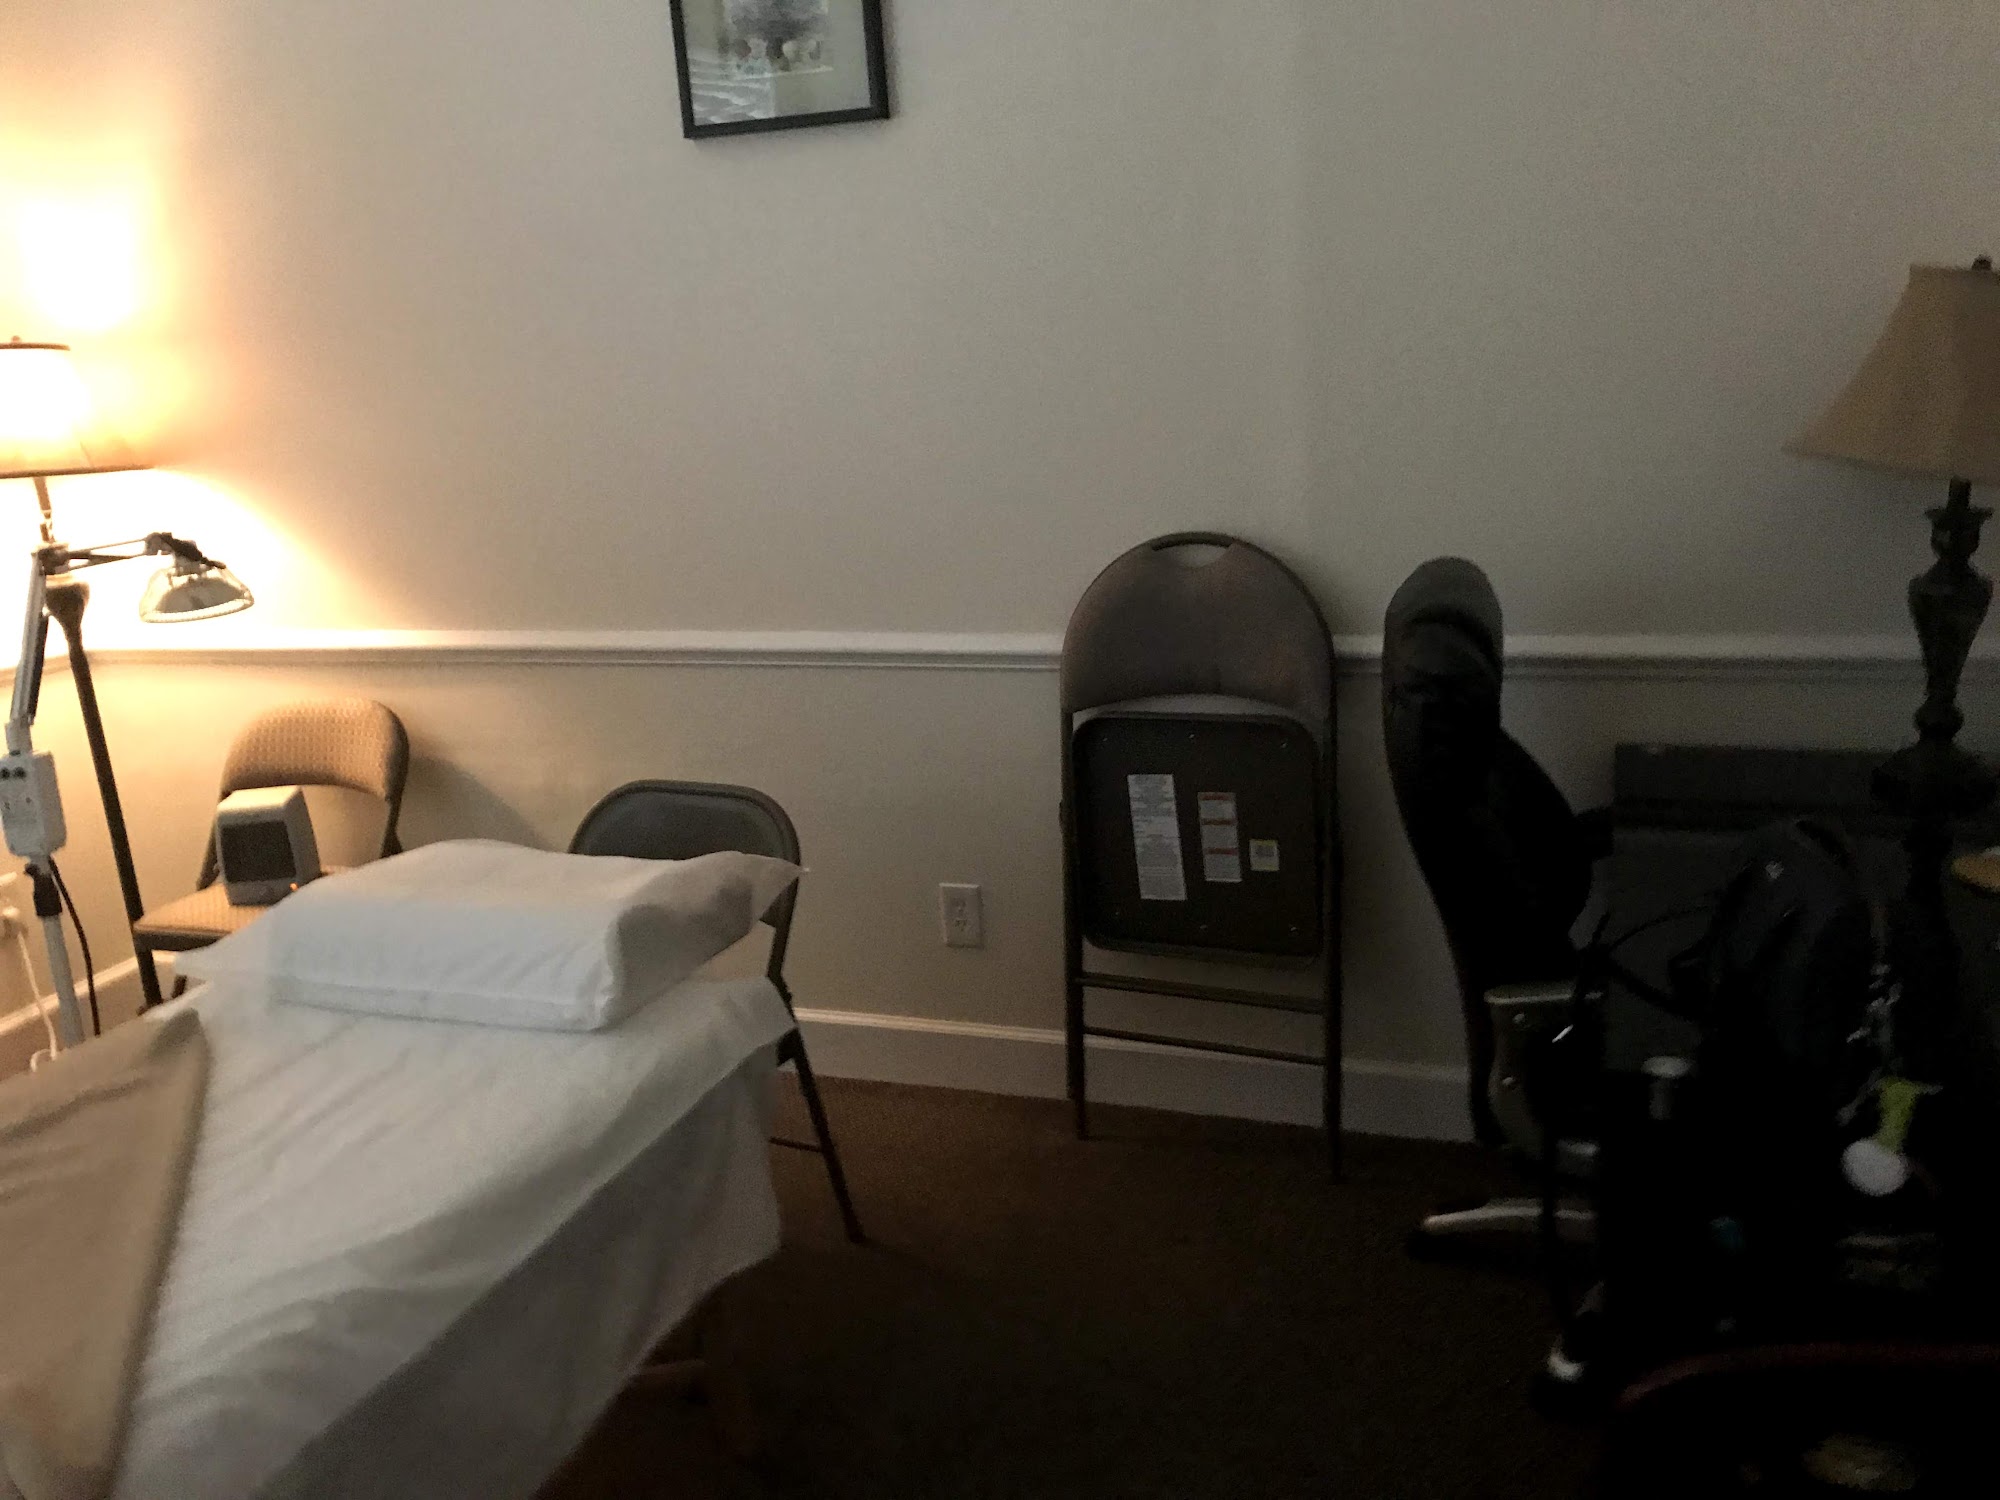 Acupuncture and Wellness Center